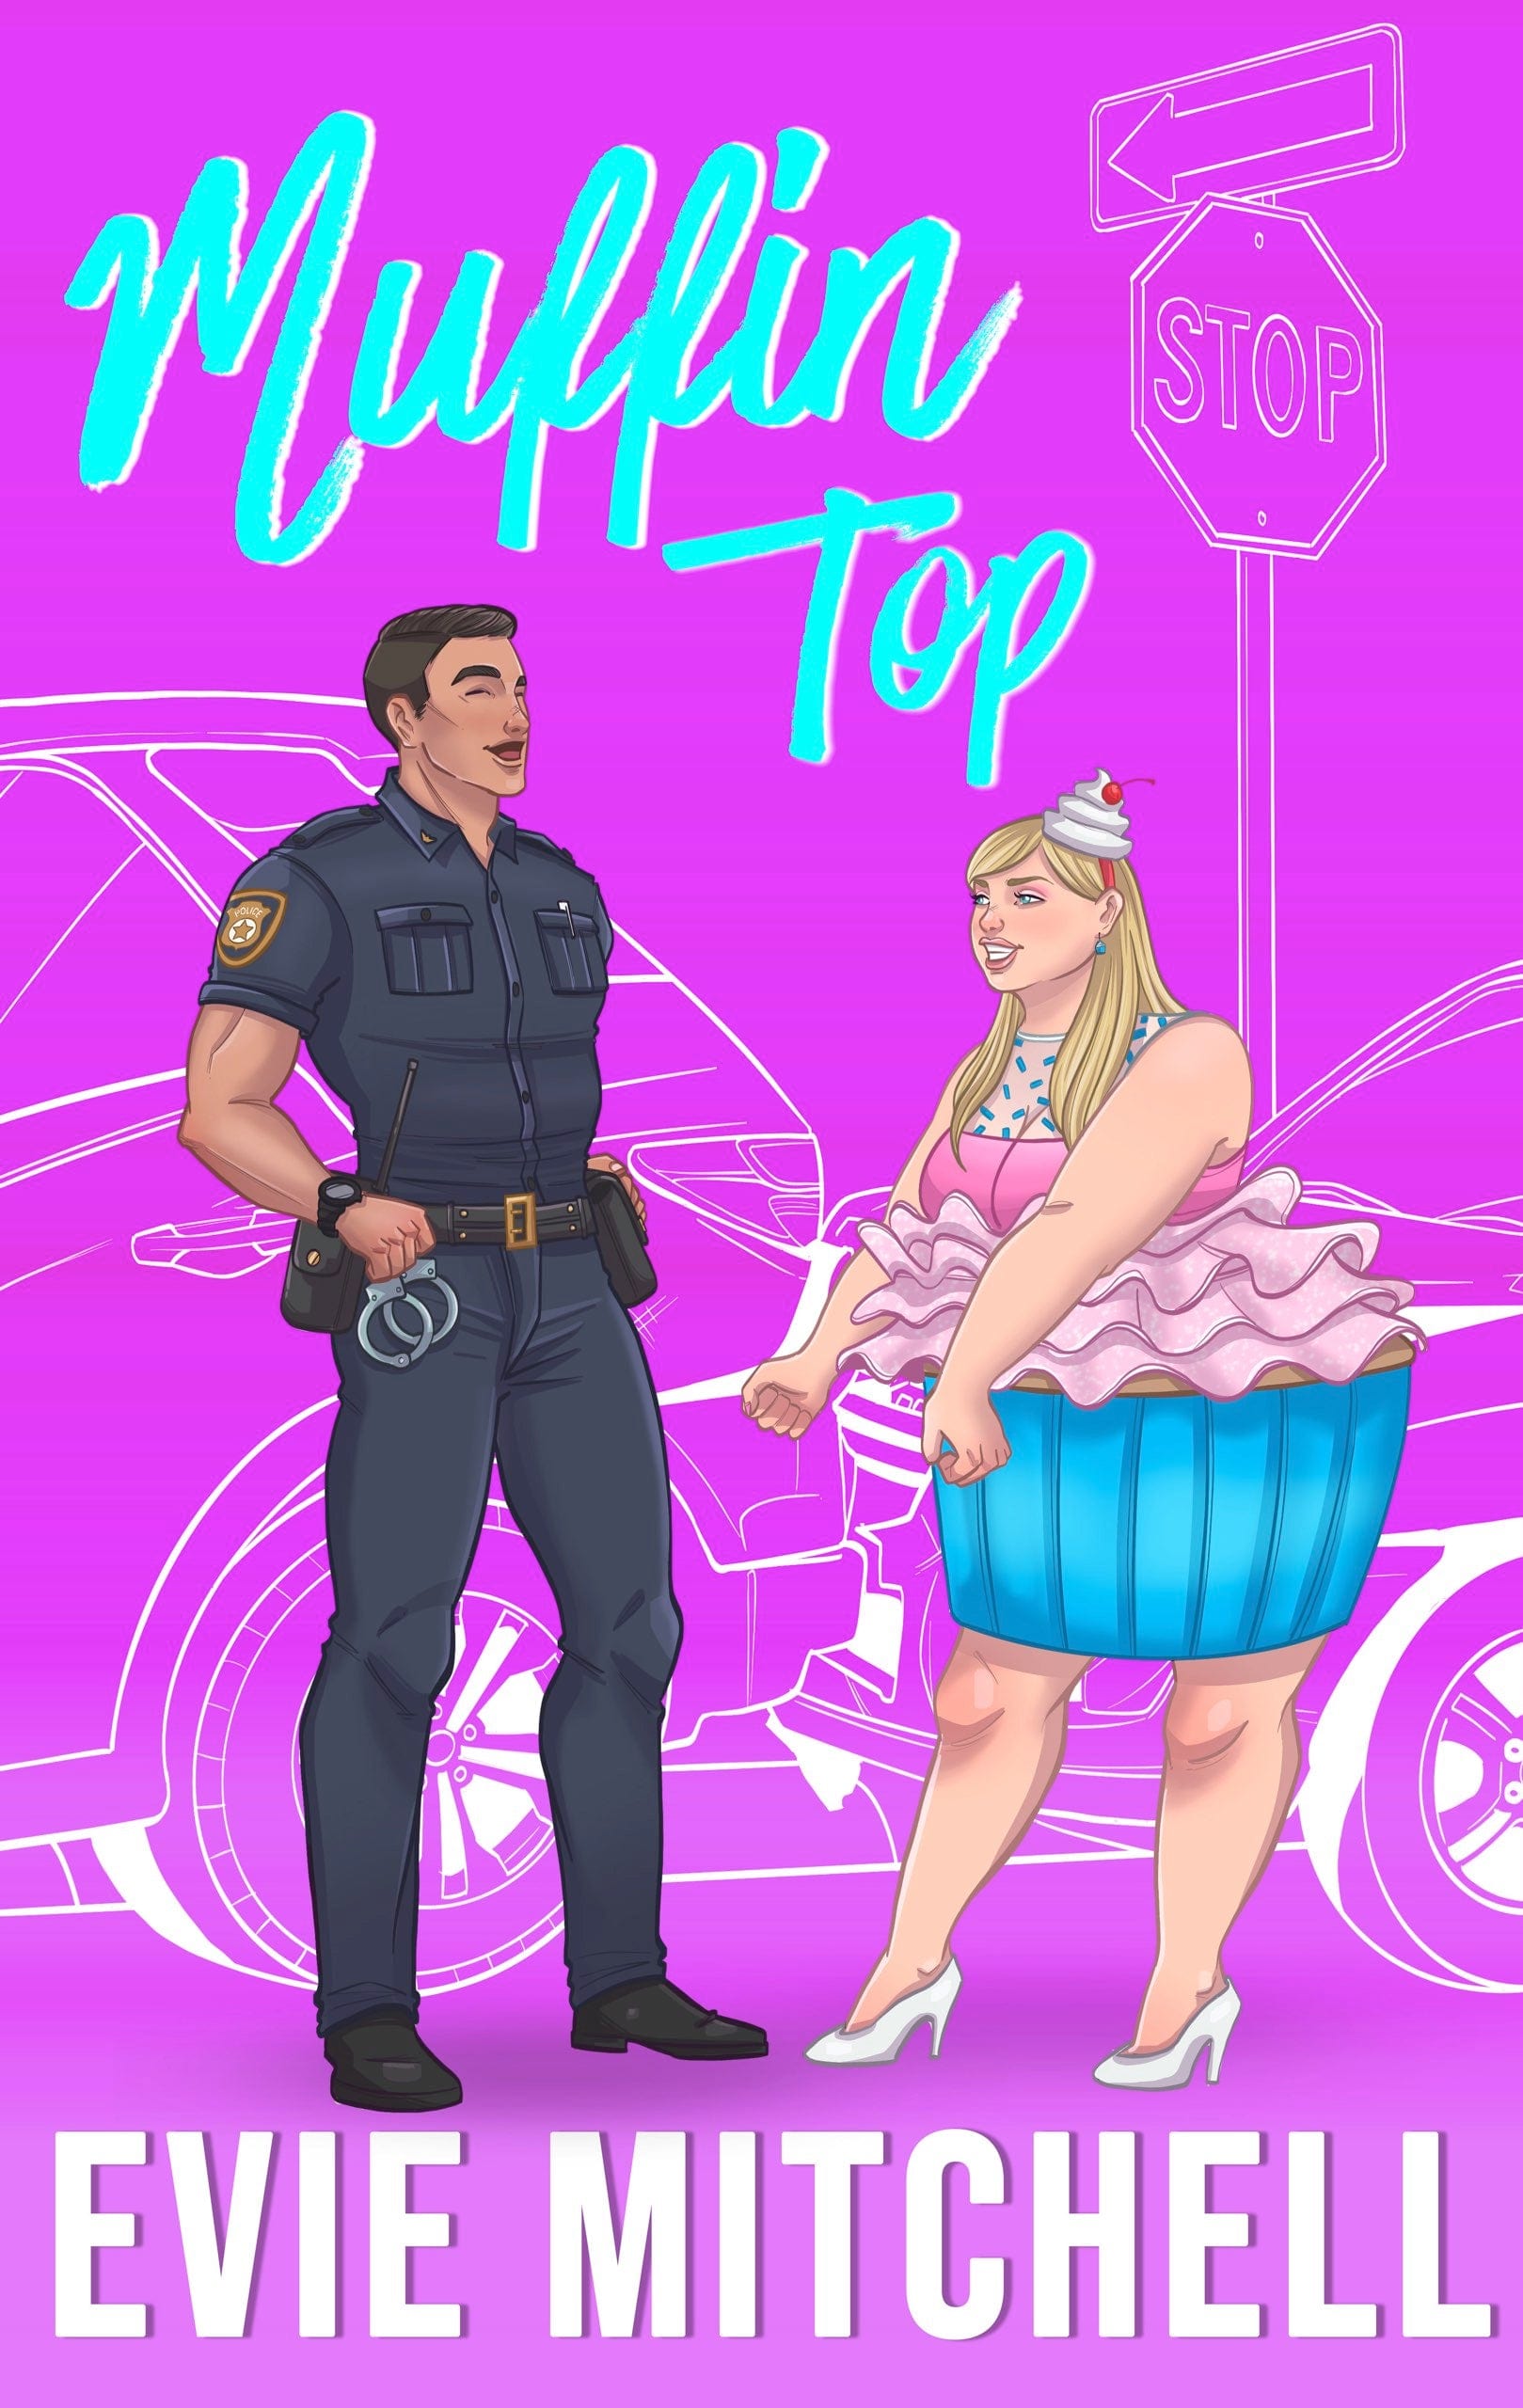 Petition Bring Back the Muffin Tops